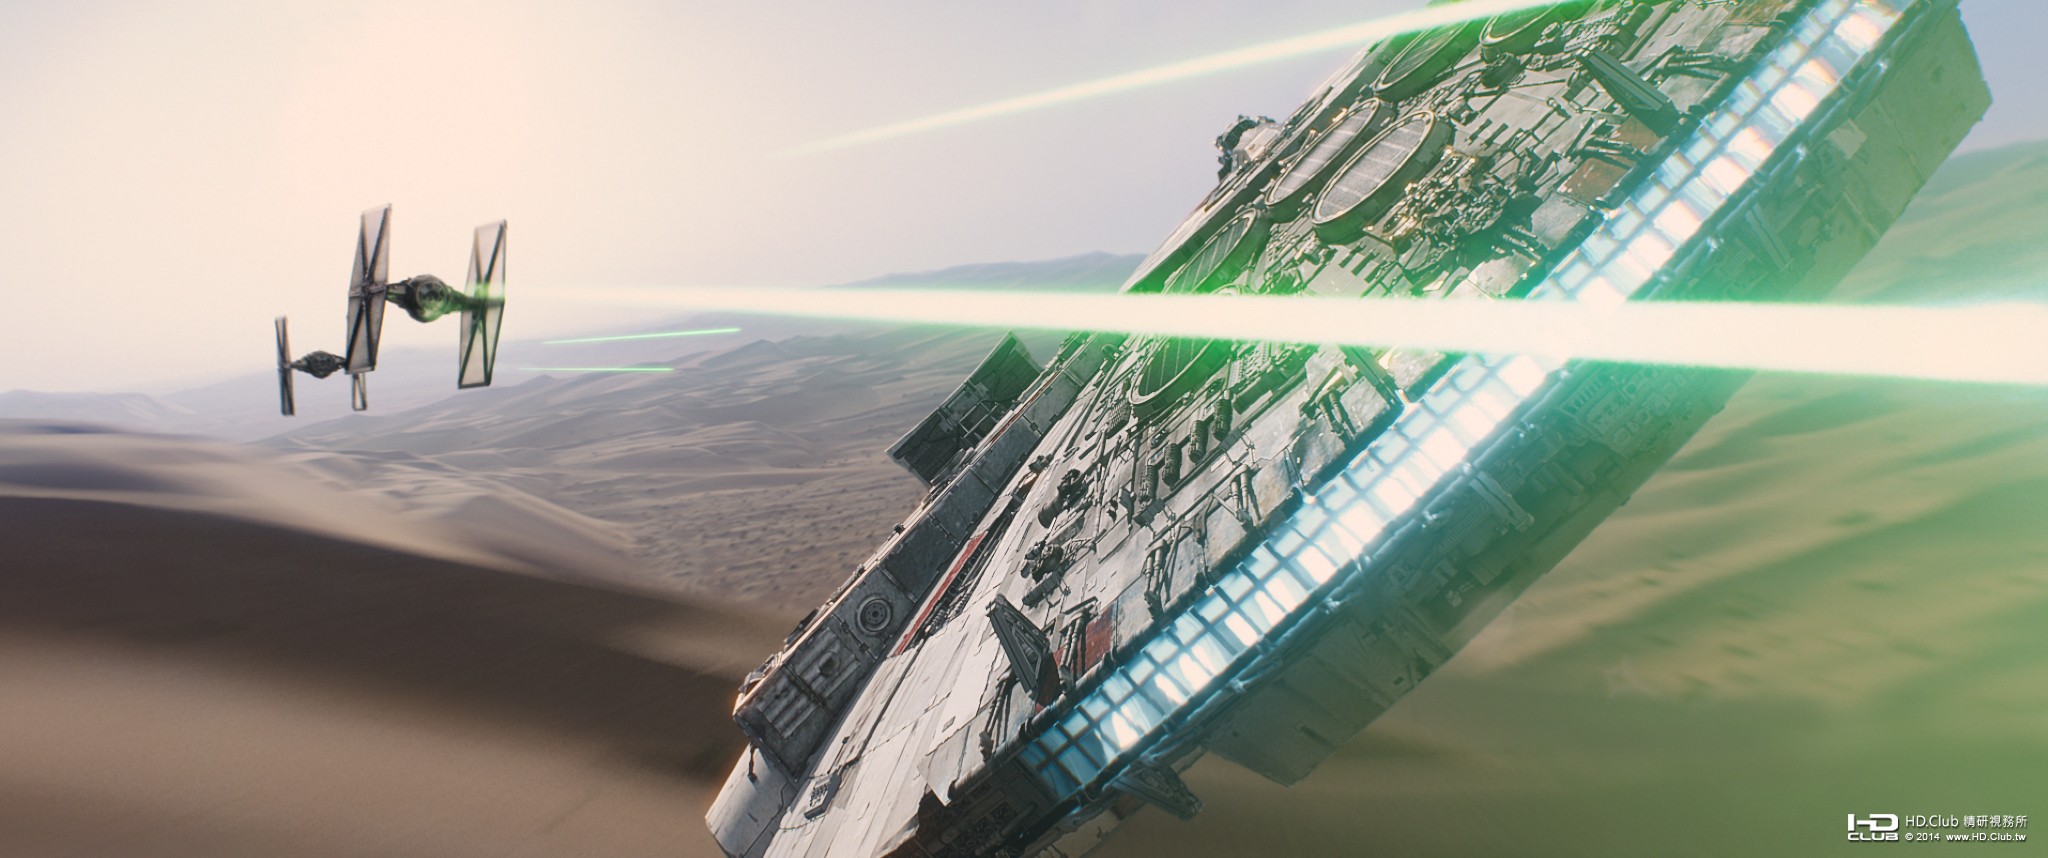 Star-Wars-7-The-Force-Awakens-Official-Millenium-Falcon-Photo.jpg